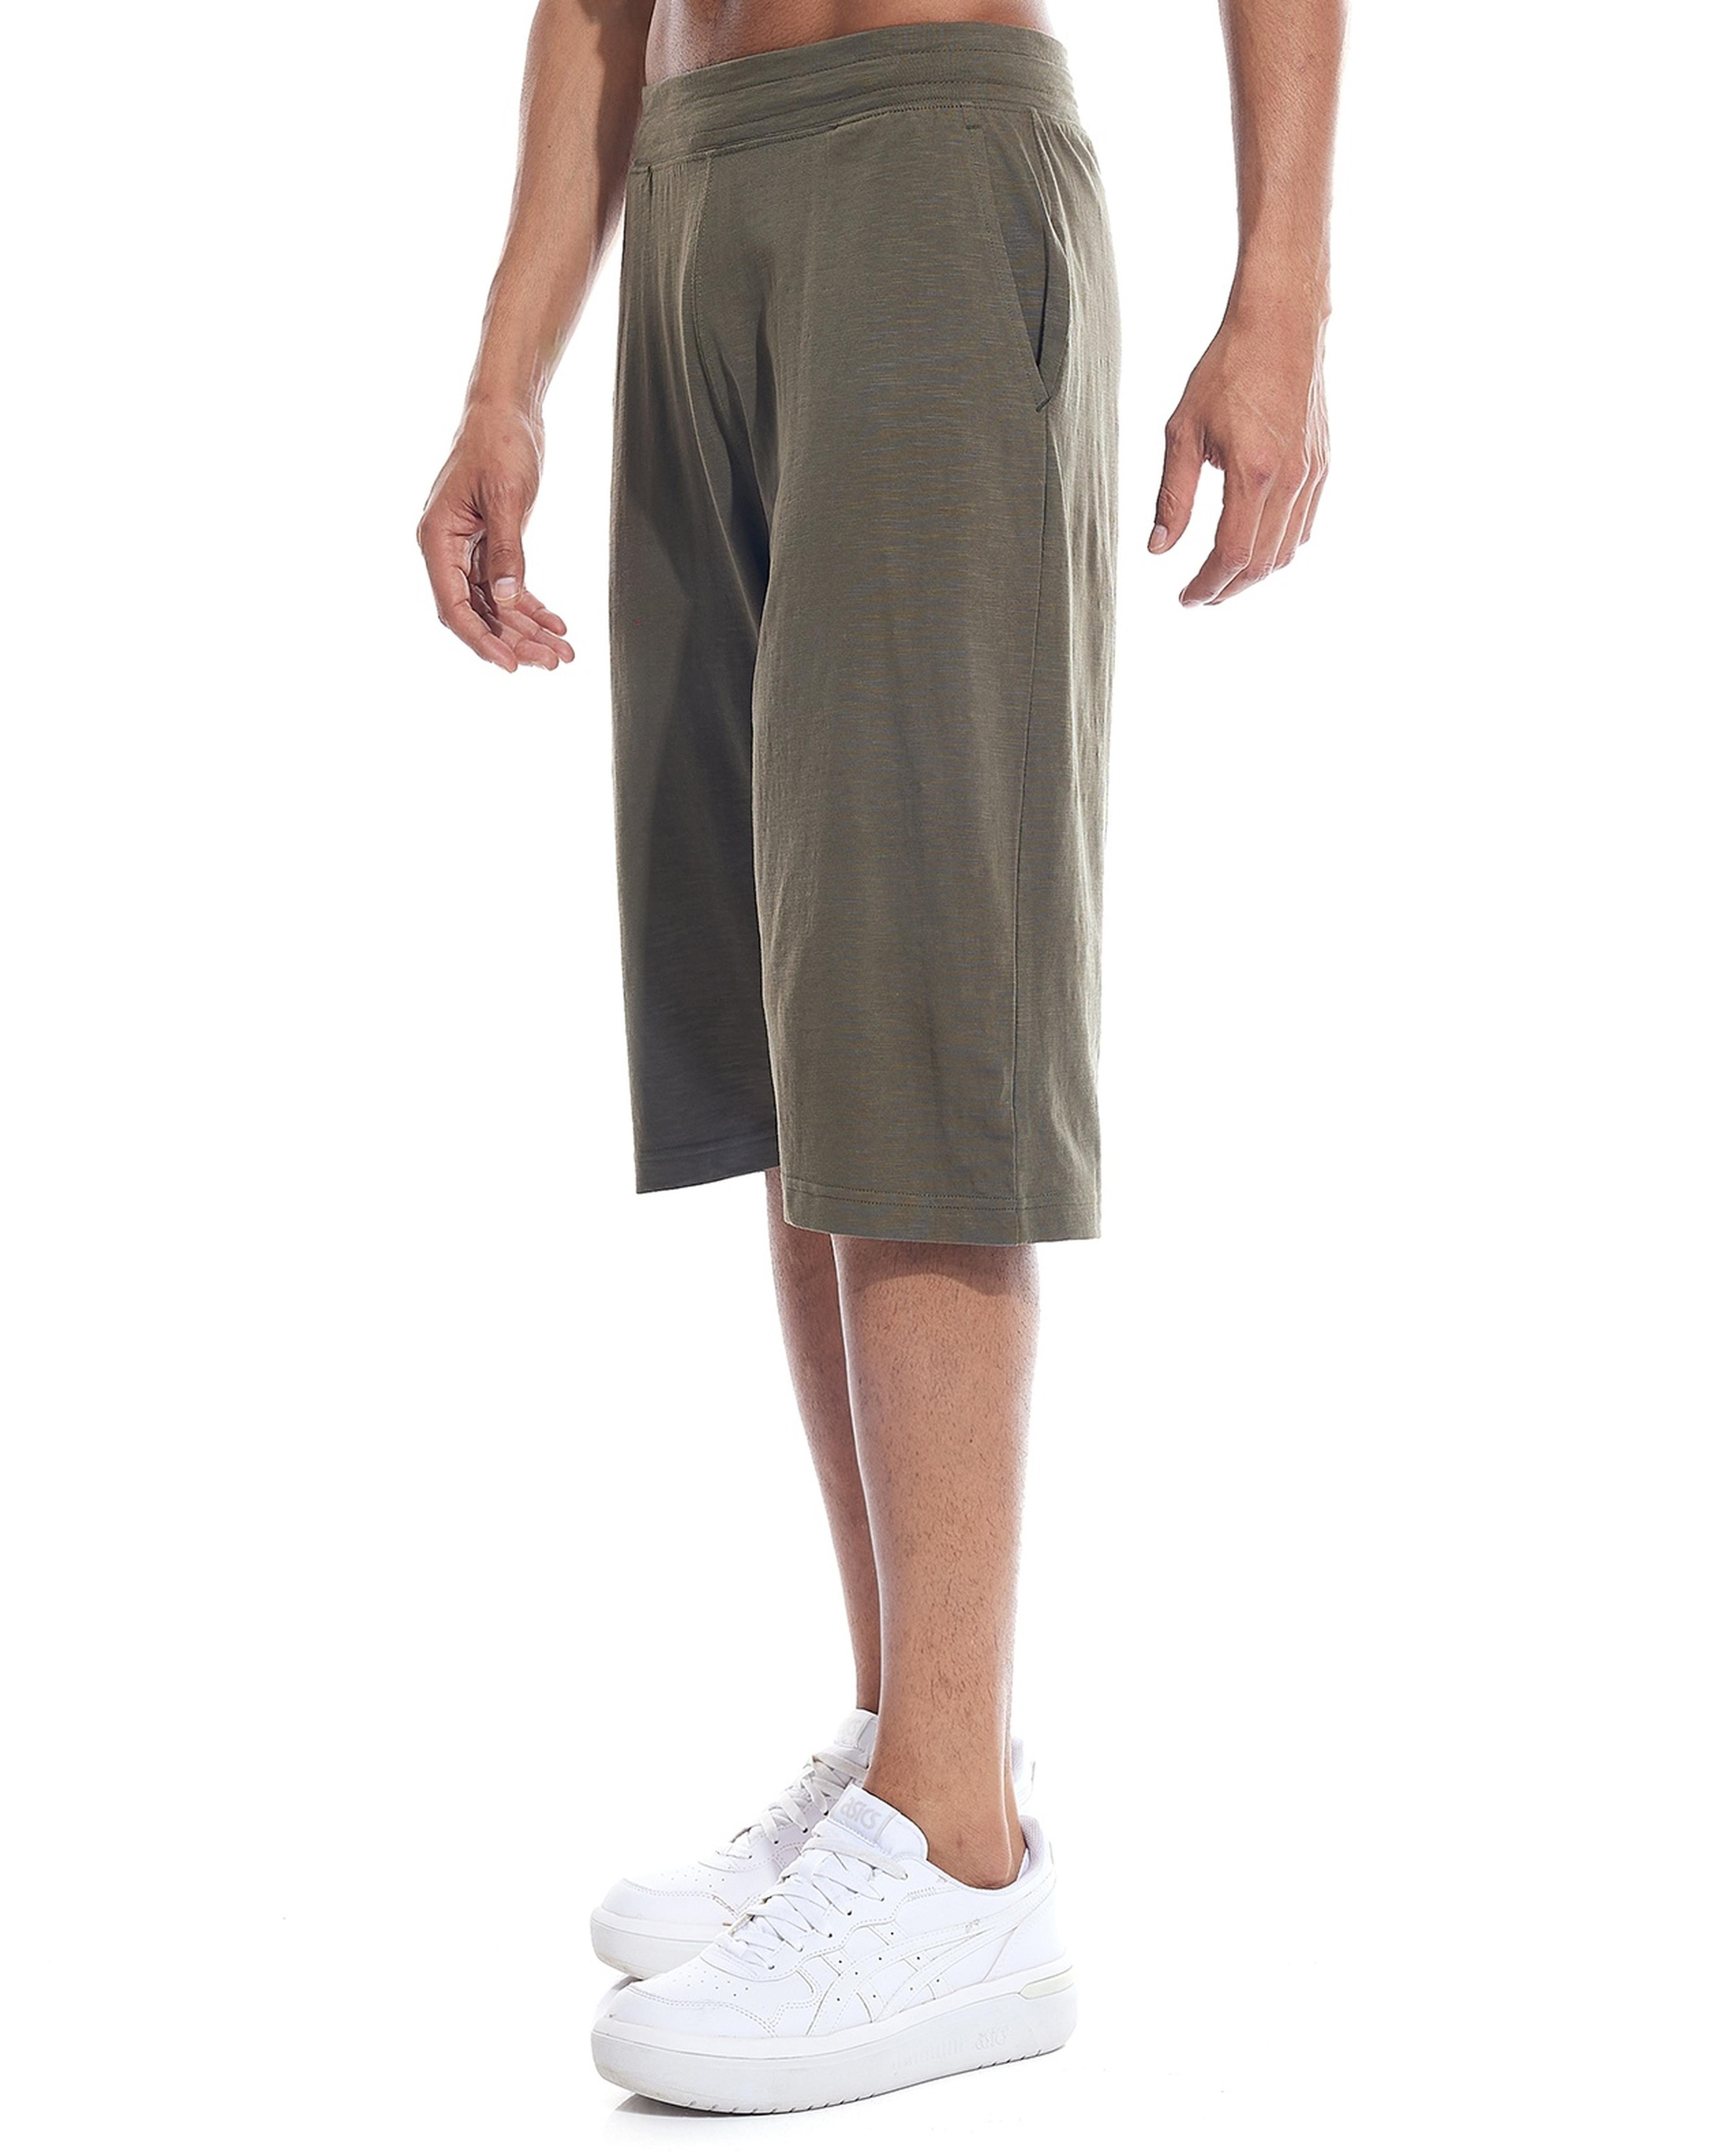 Solid Lounge Shorts with Elastic Waist